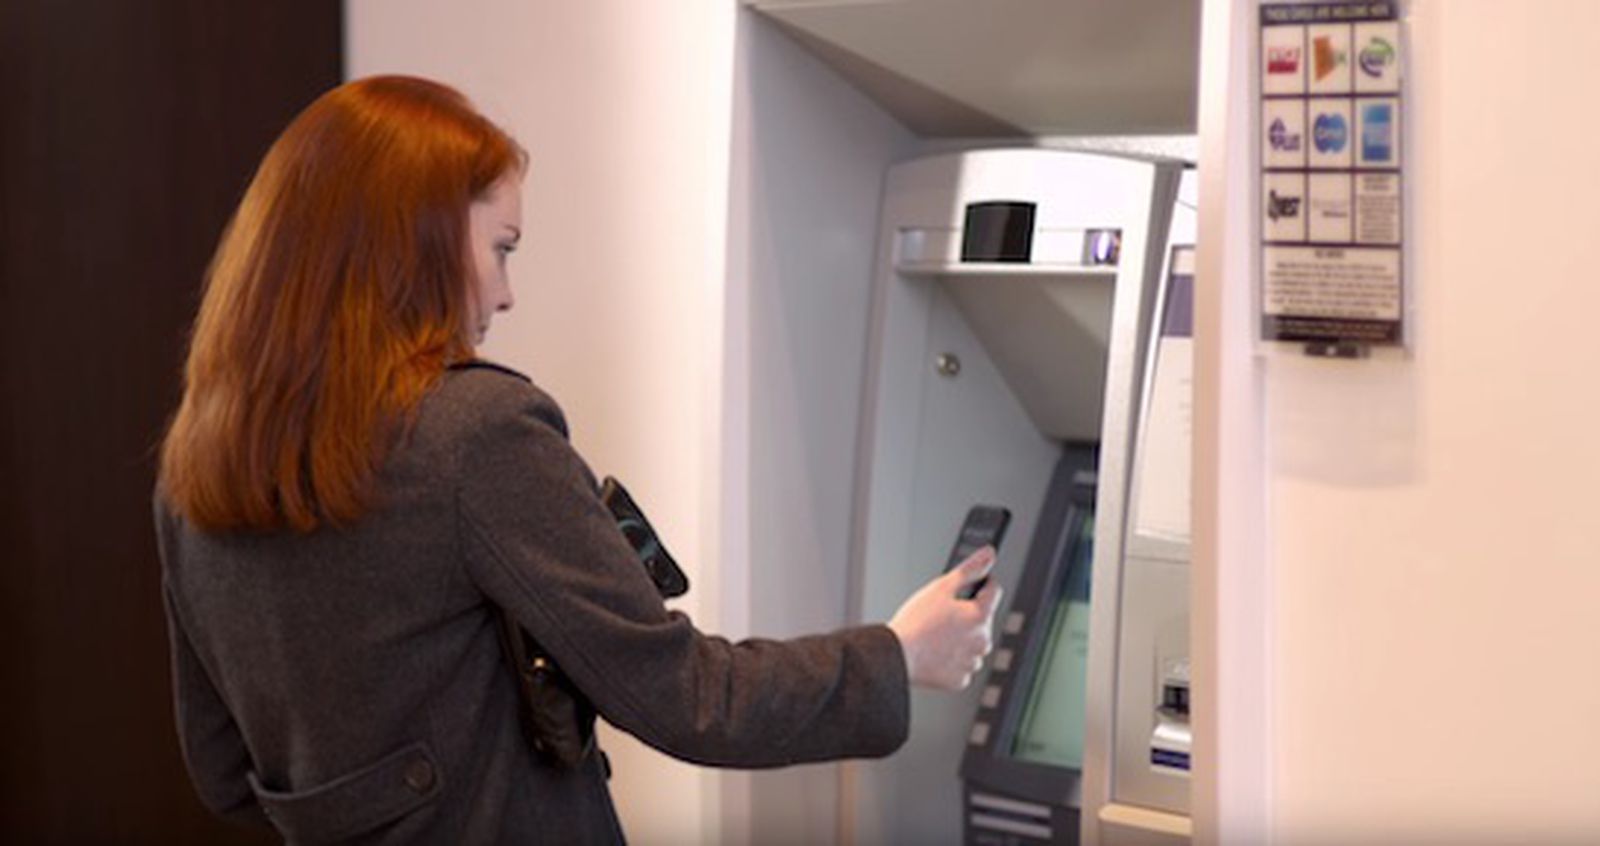 Cardless Withdrawals With Touch Id Coming To Over 70000 Atms Across